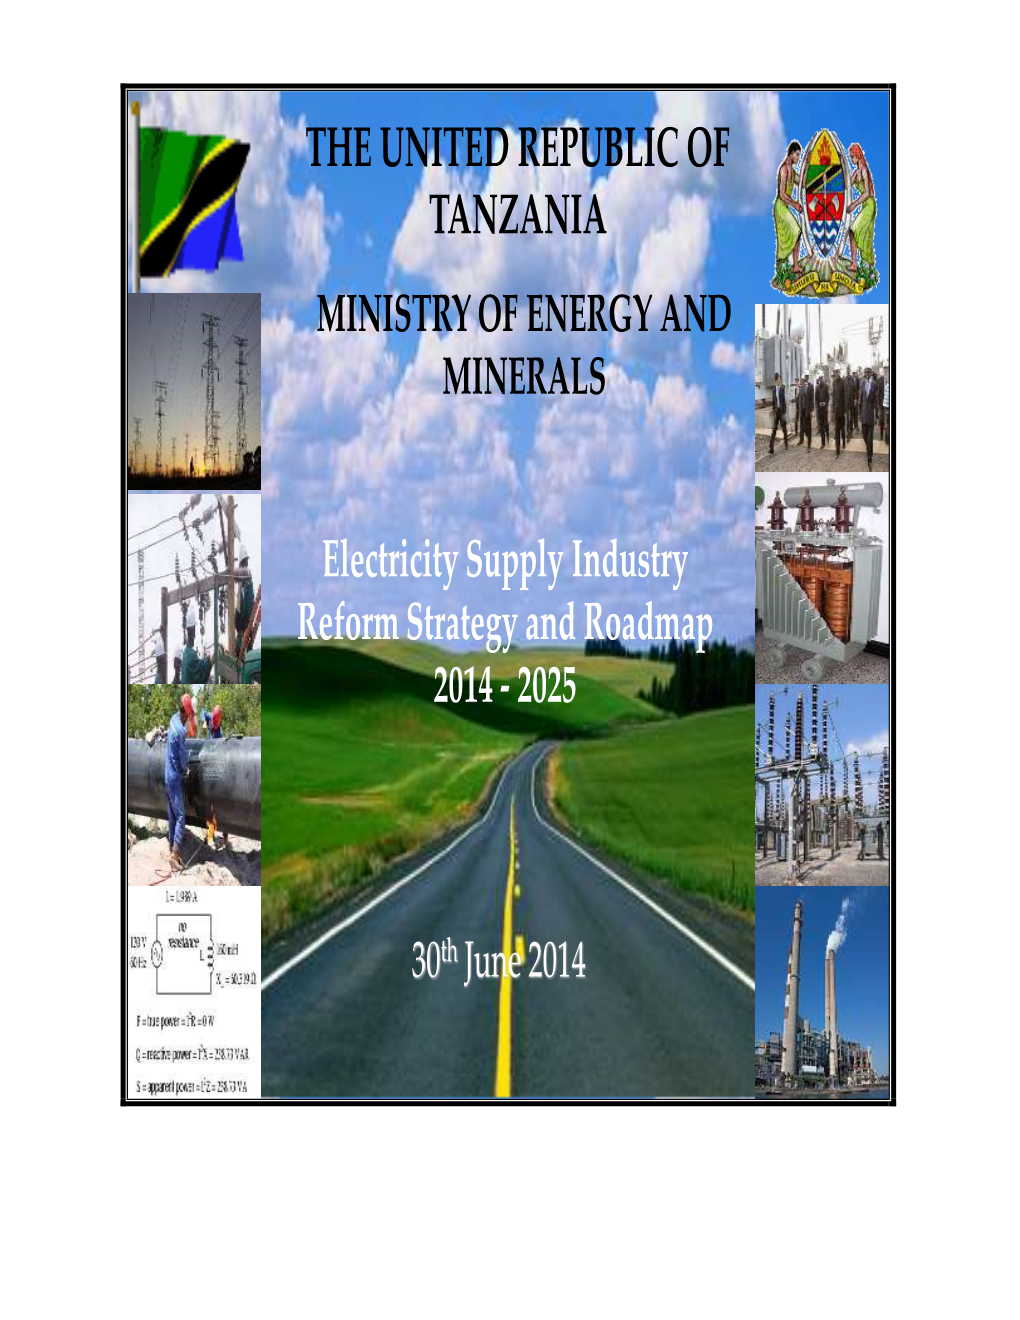 The United Republic of Tanzania Ministry of Energy and Minerals